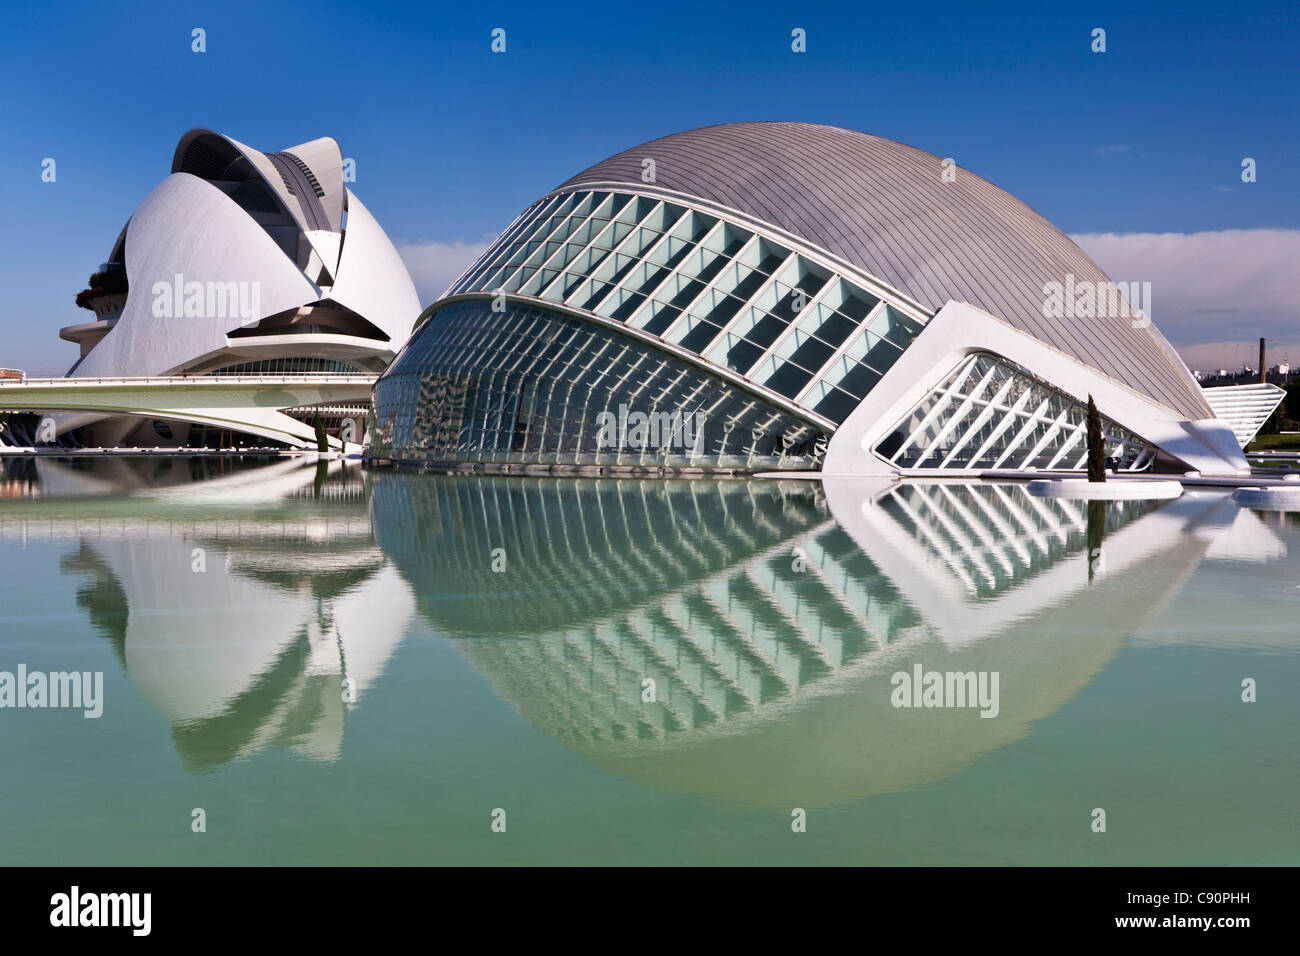 Hemisferic Imax Cinema Planetarium and Laserium. Built in the shape of the eye and Palau de les Arts City of Arts and Sciences C Stock Photo